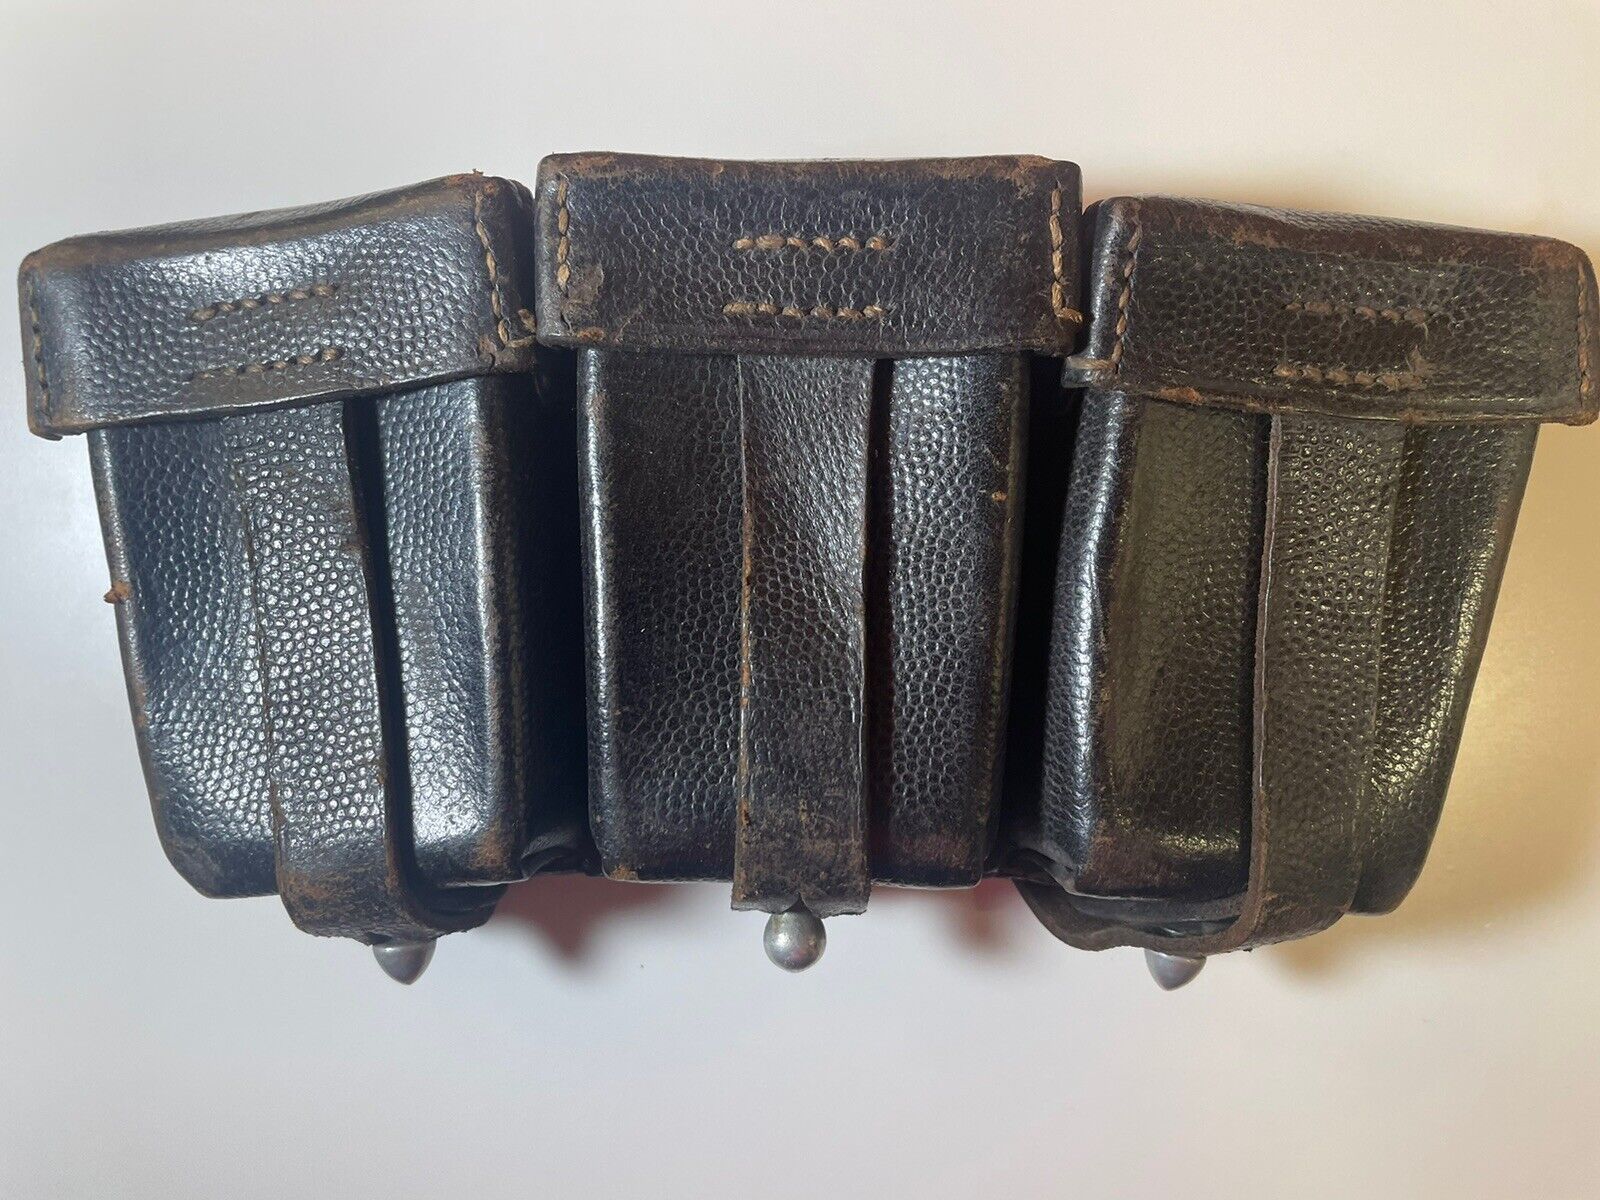 German 1939 Dated K98 Wartime Brown Leather Ammunition Pouch Stamped Original